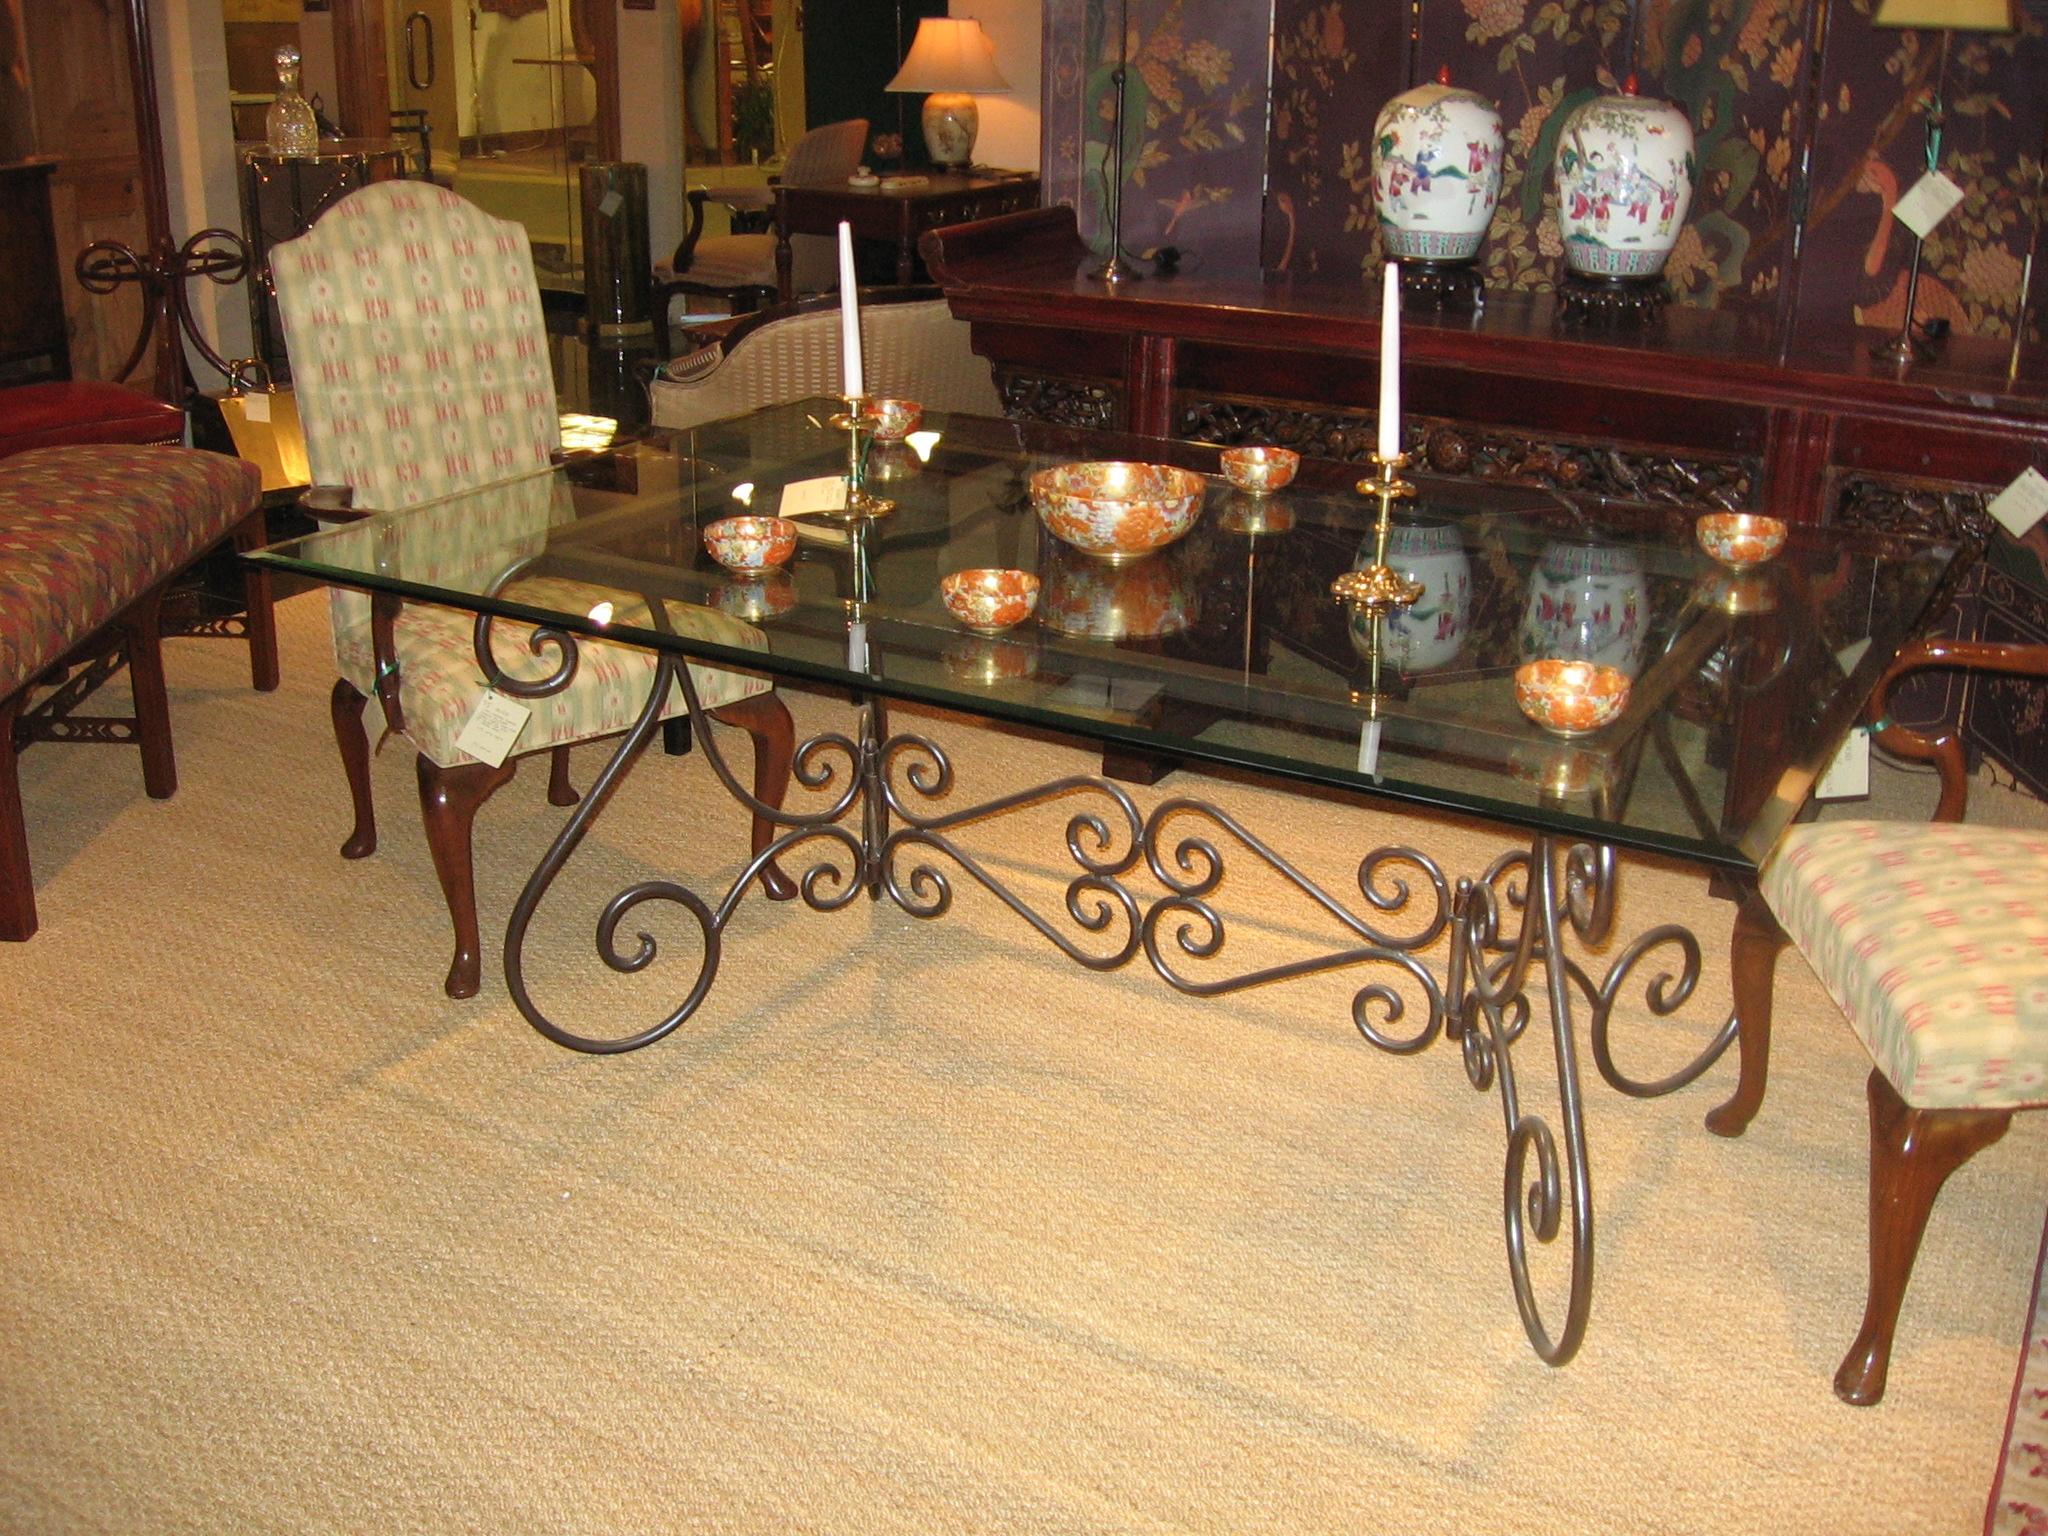 Create a peaceful dining environment in your breakfast room, back patio or dining room with this lovely 19th century French ornate polish steel base table with 1/2